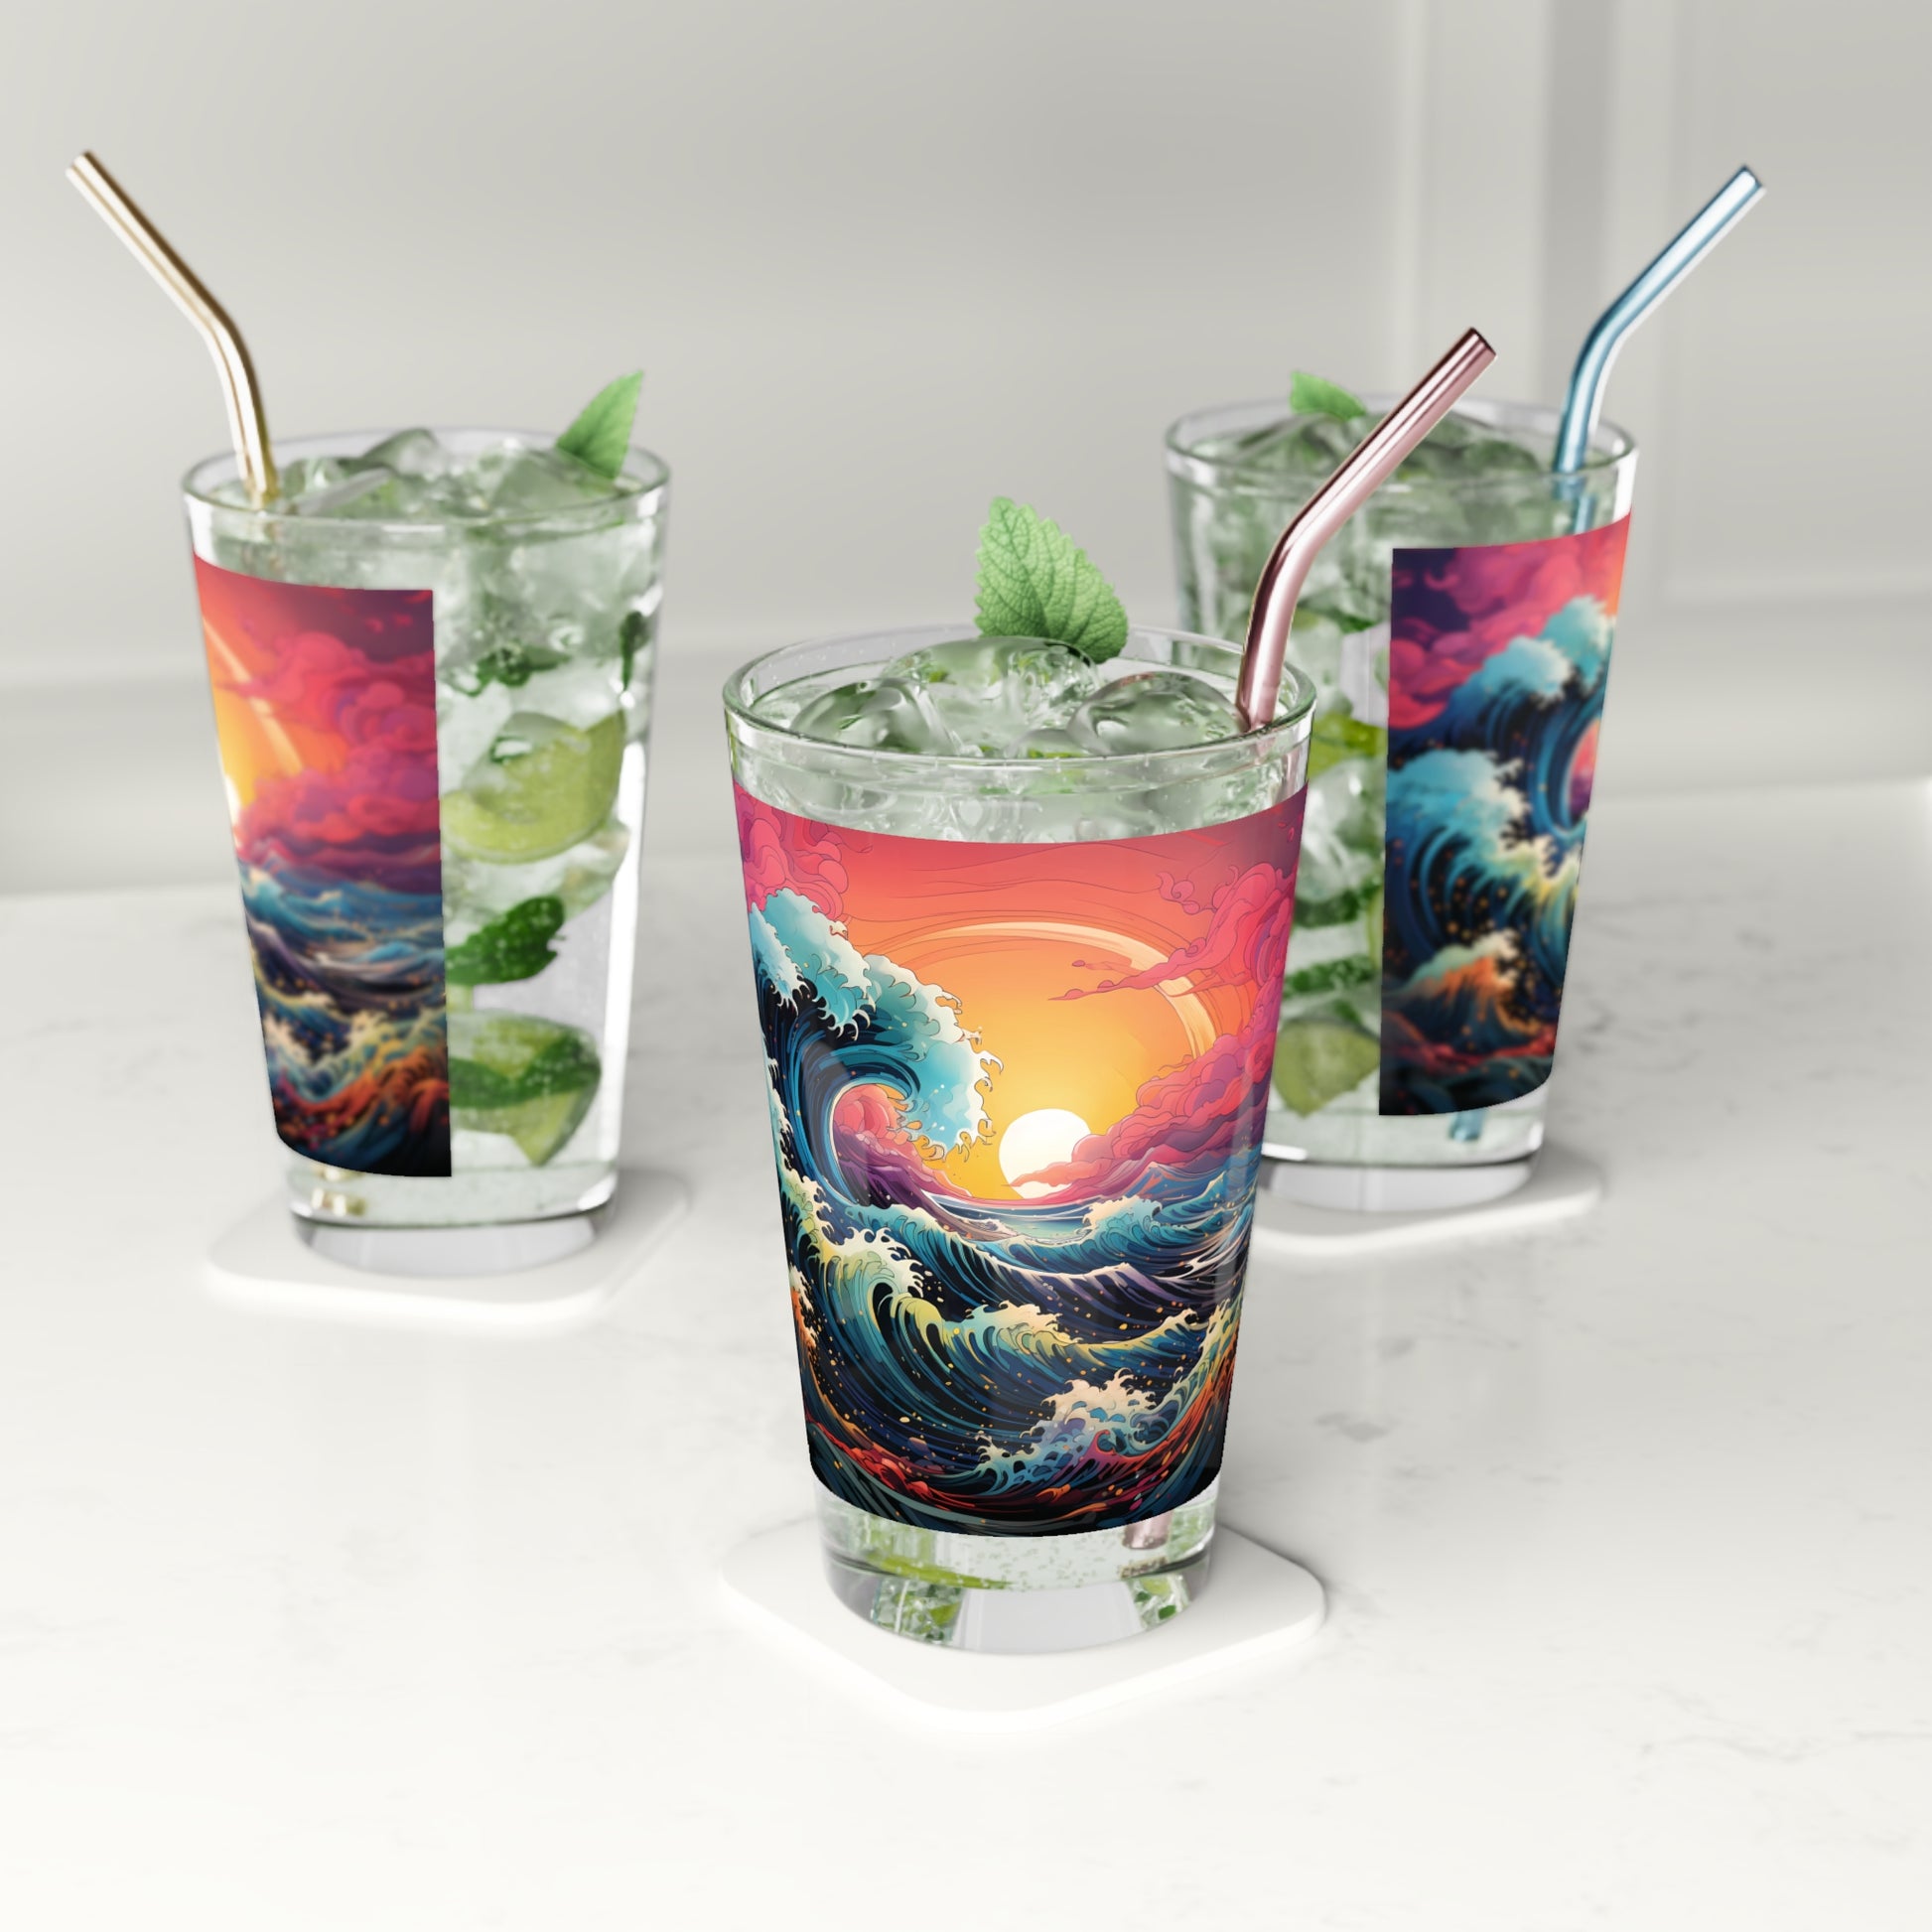 Savor the serenity of waves with our Colorful Waves Pint Glass, 16oz. Waves Design #010. Your sip, your sanctuary, curated by Stashbox.ai.